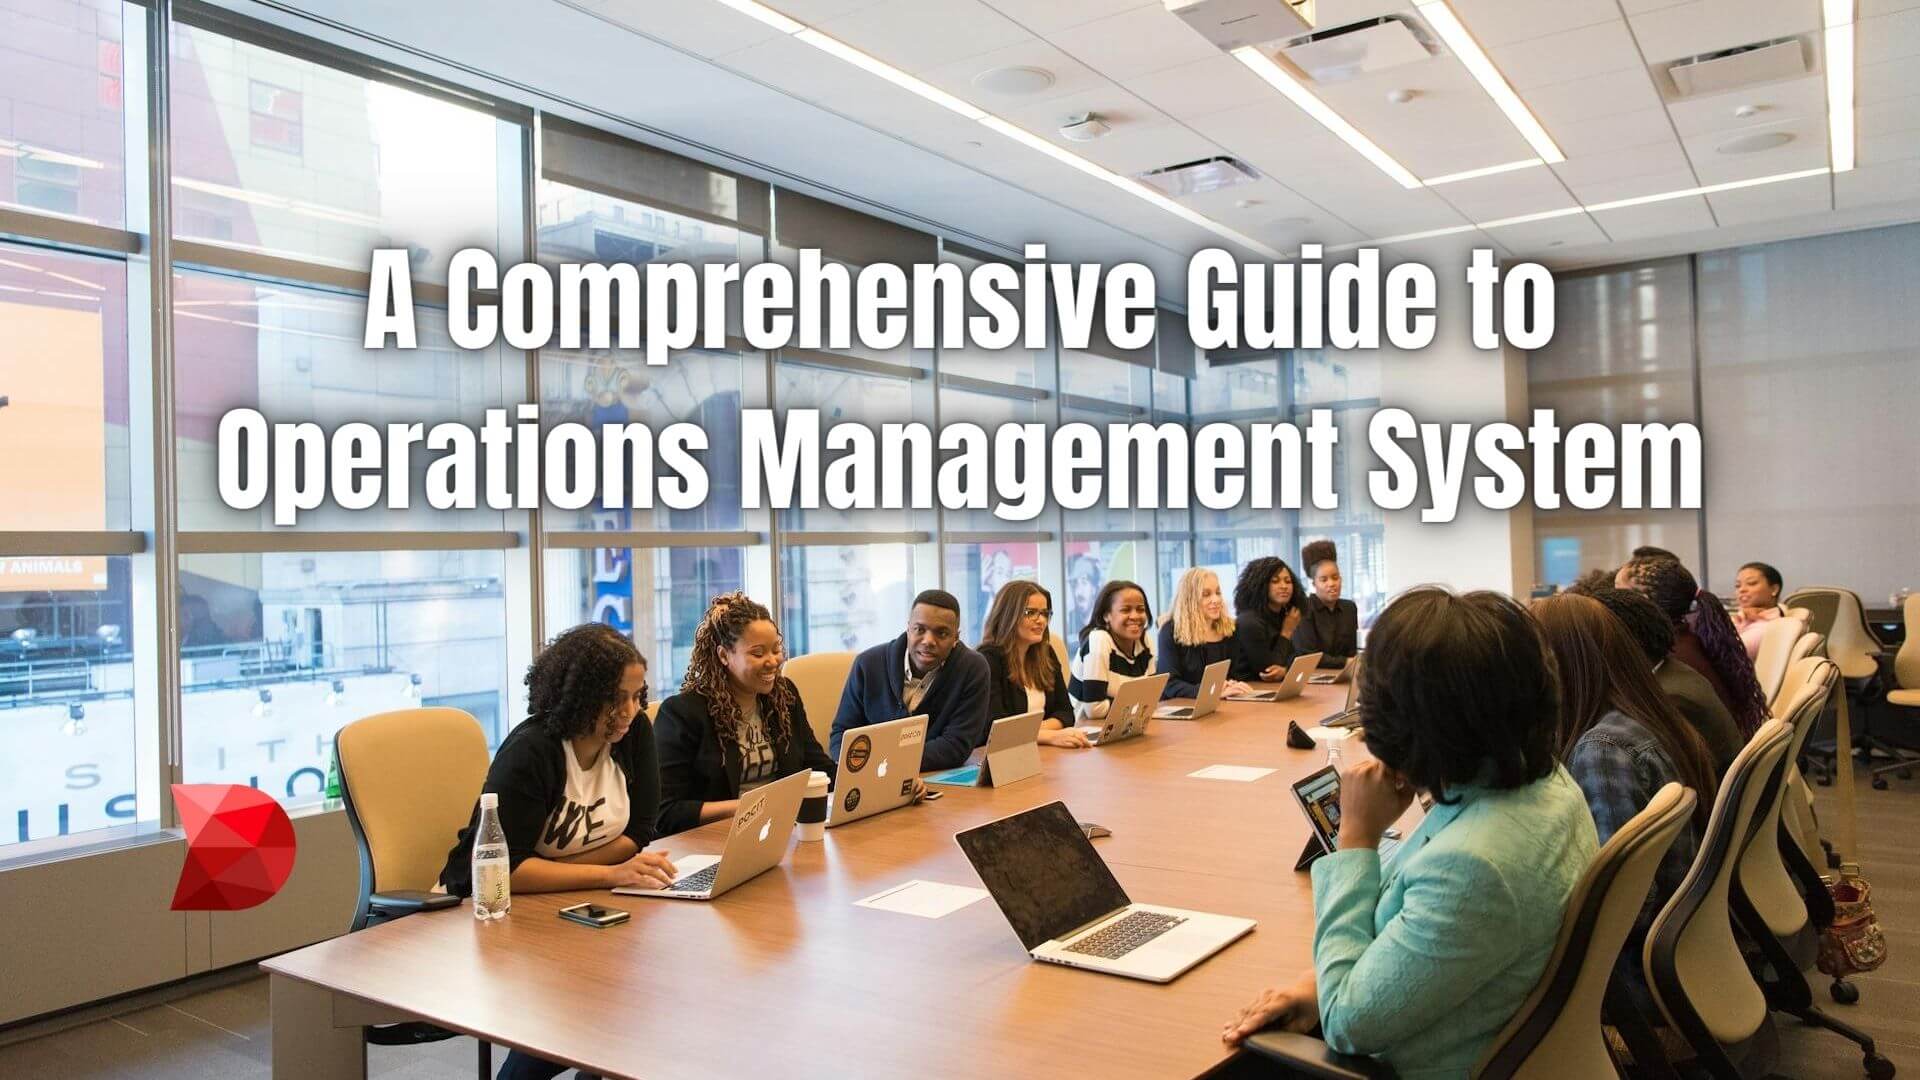 Elevate your operations with our expert guide to operations management system. Discover strategies, tools, and best practices for success.